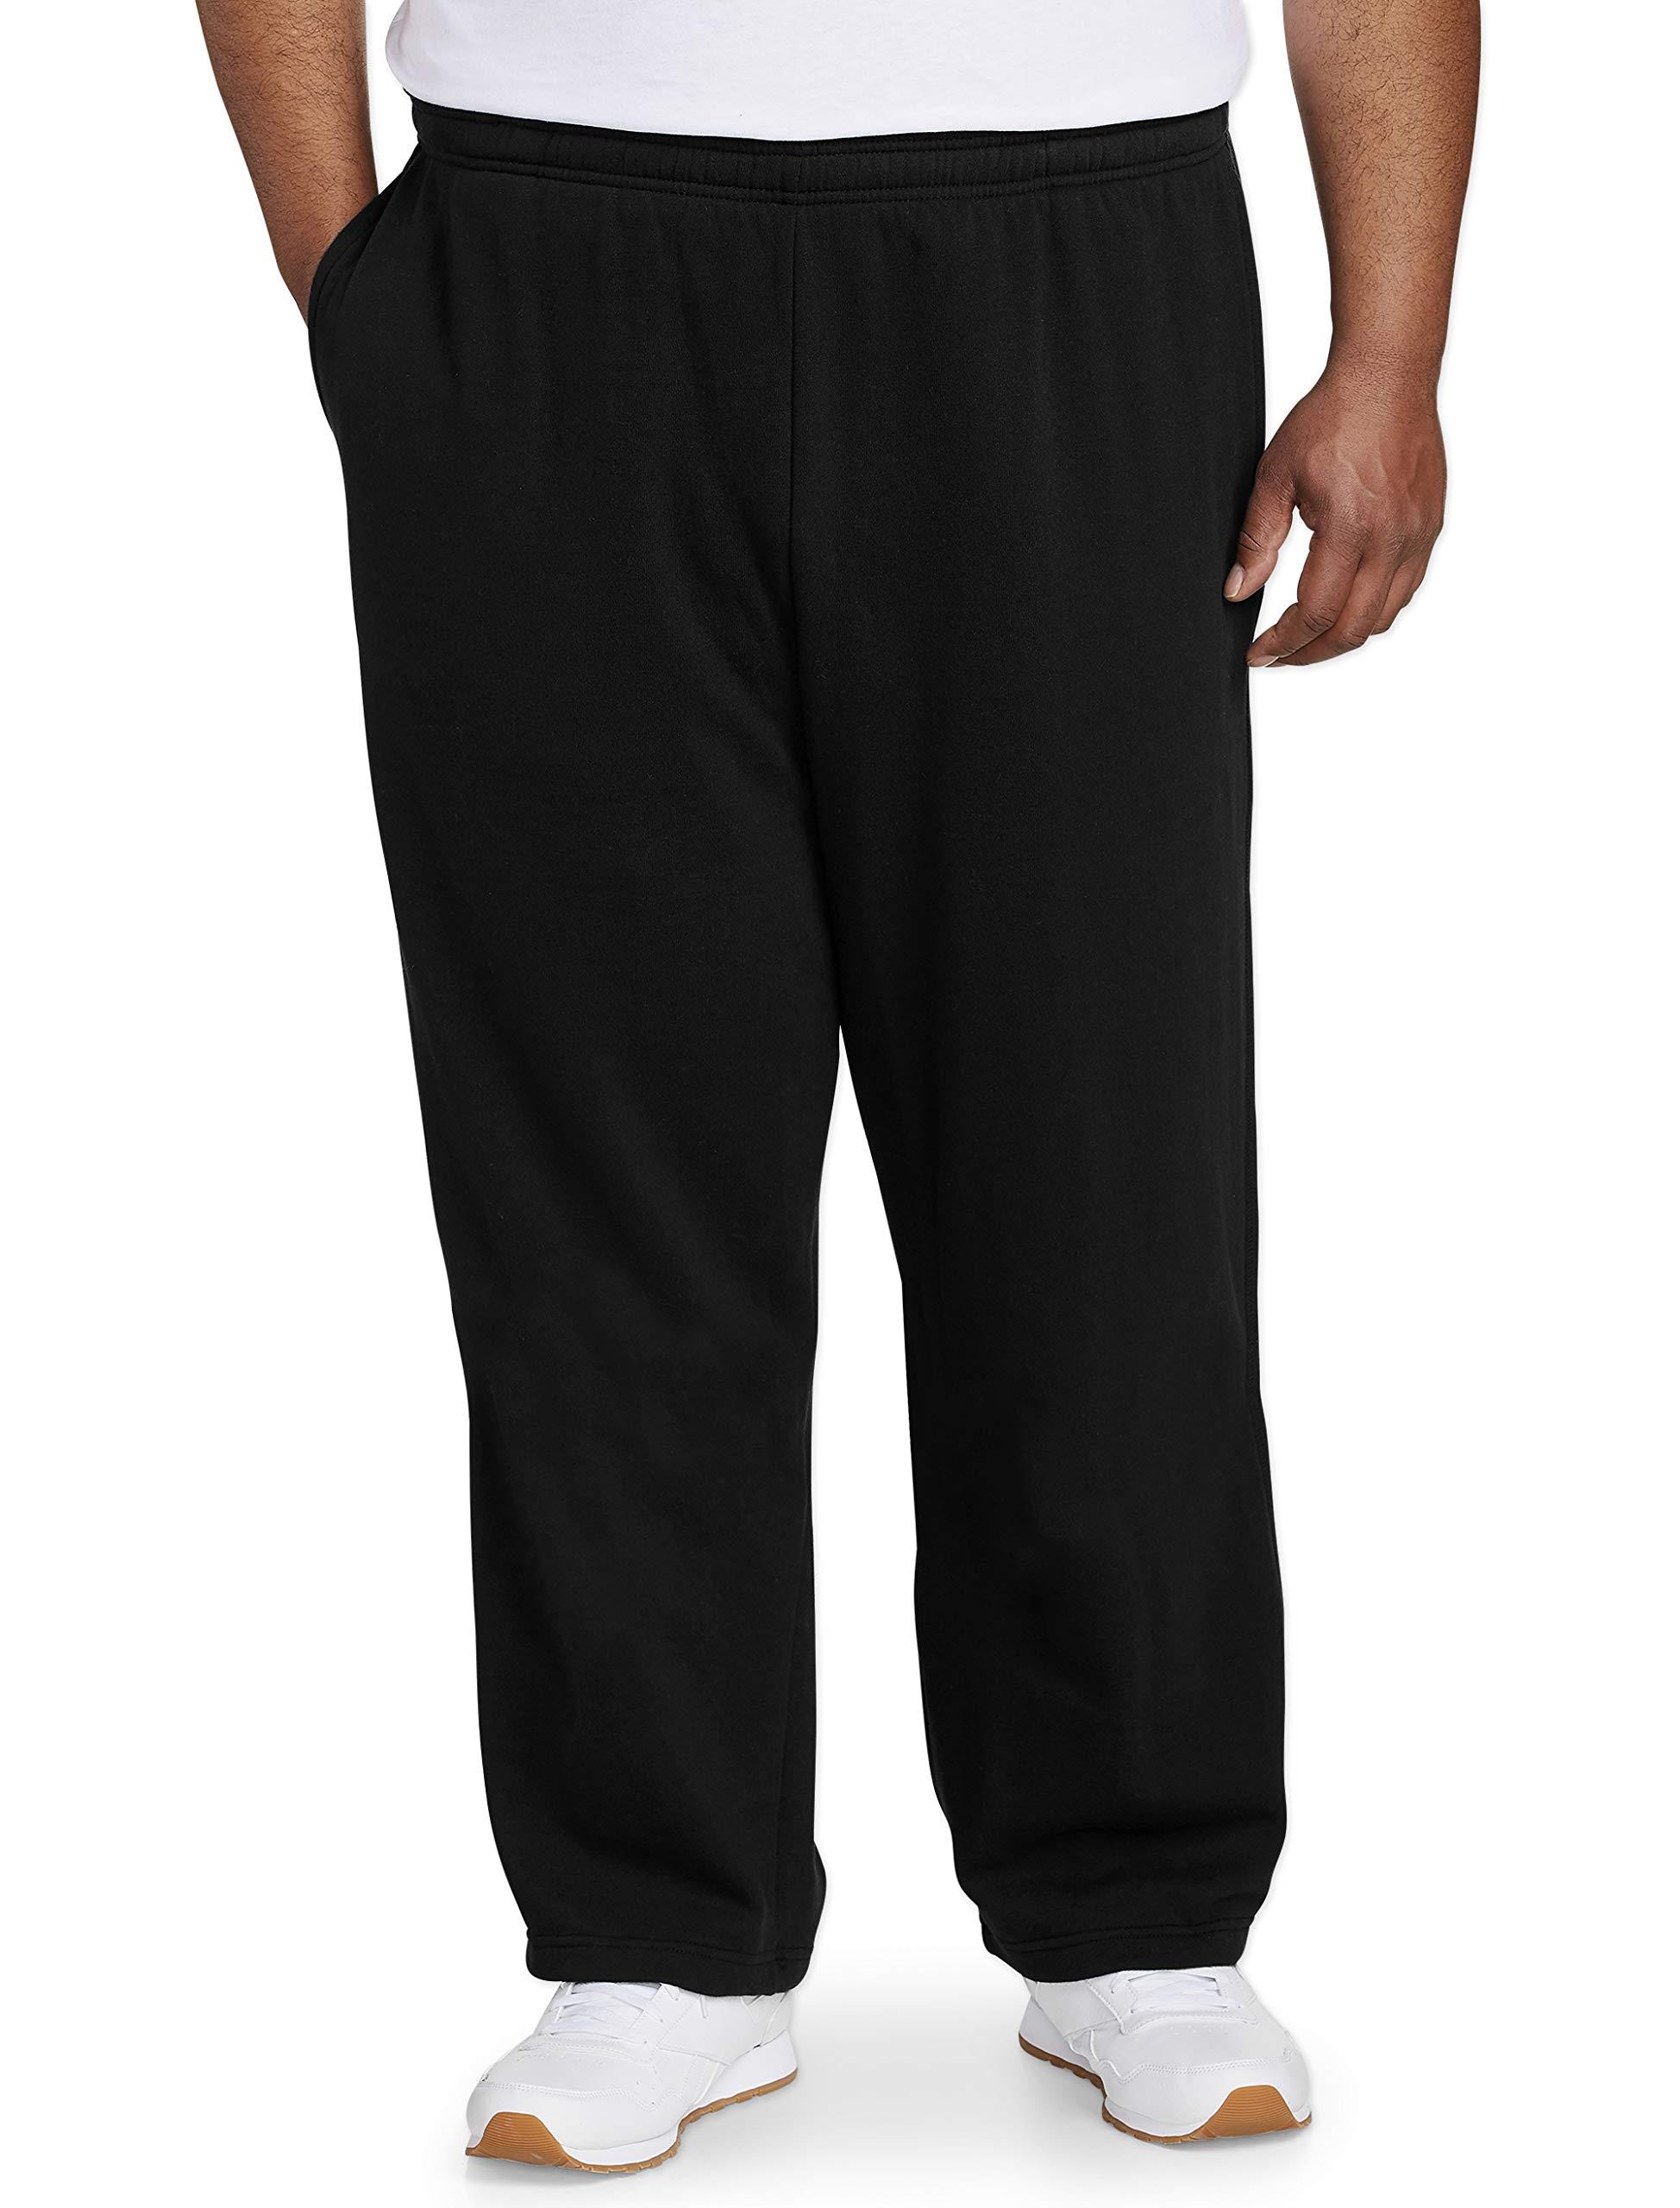 Amazon Essentials Big & Tall Fleece Pant Fit By Dxl in Black for Men - Lyst